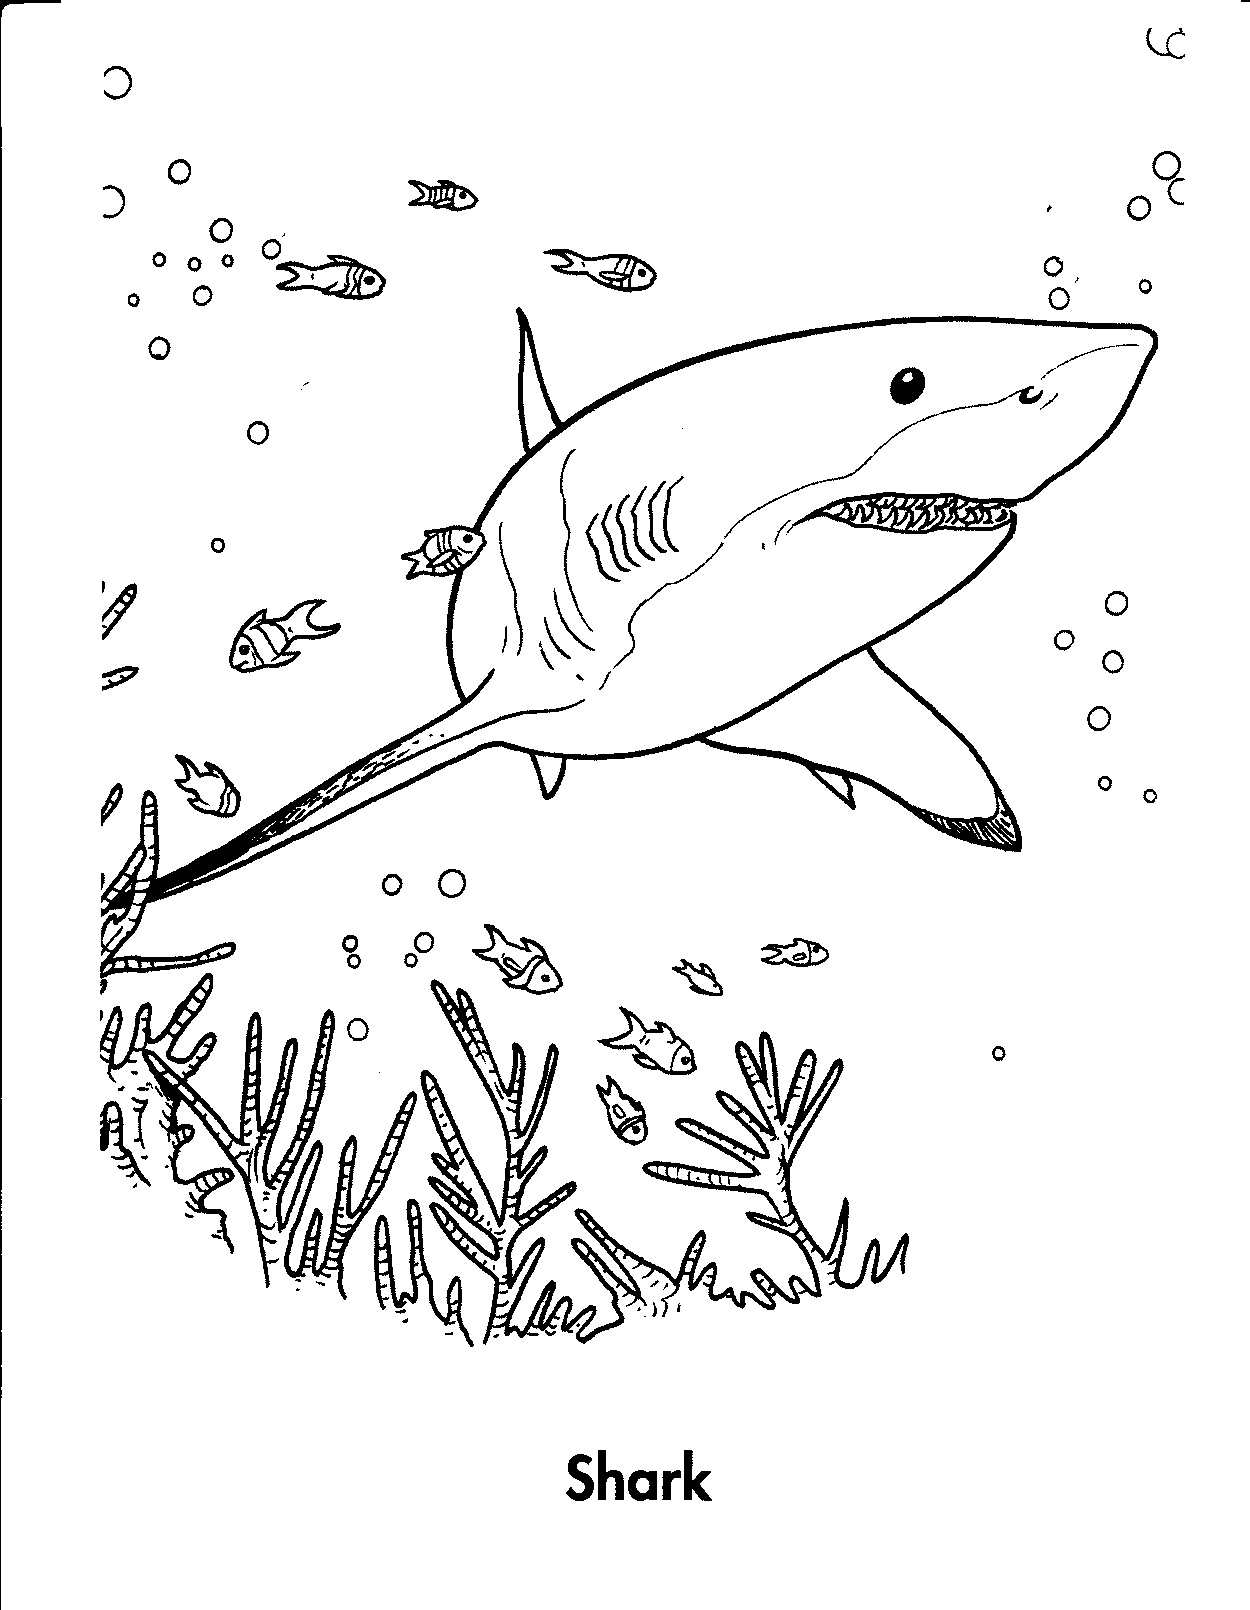 https://www.bestcoloringpagesforkids.com/wp-content/uploads/2013/07/Tiger-Shark-Coloring-Pages.jpg